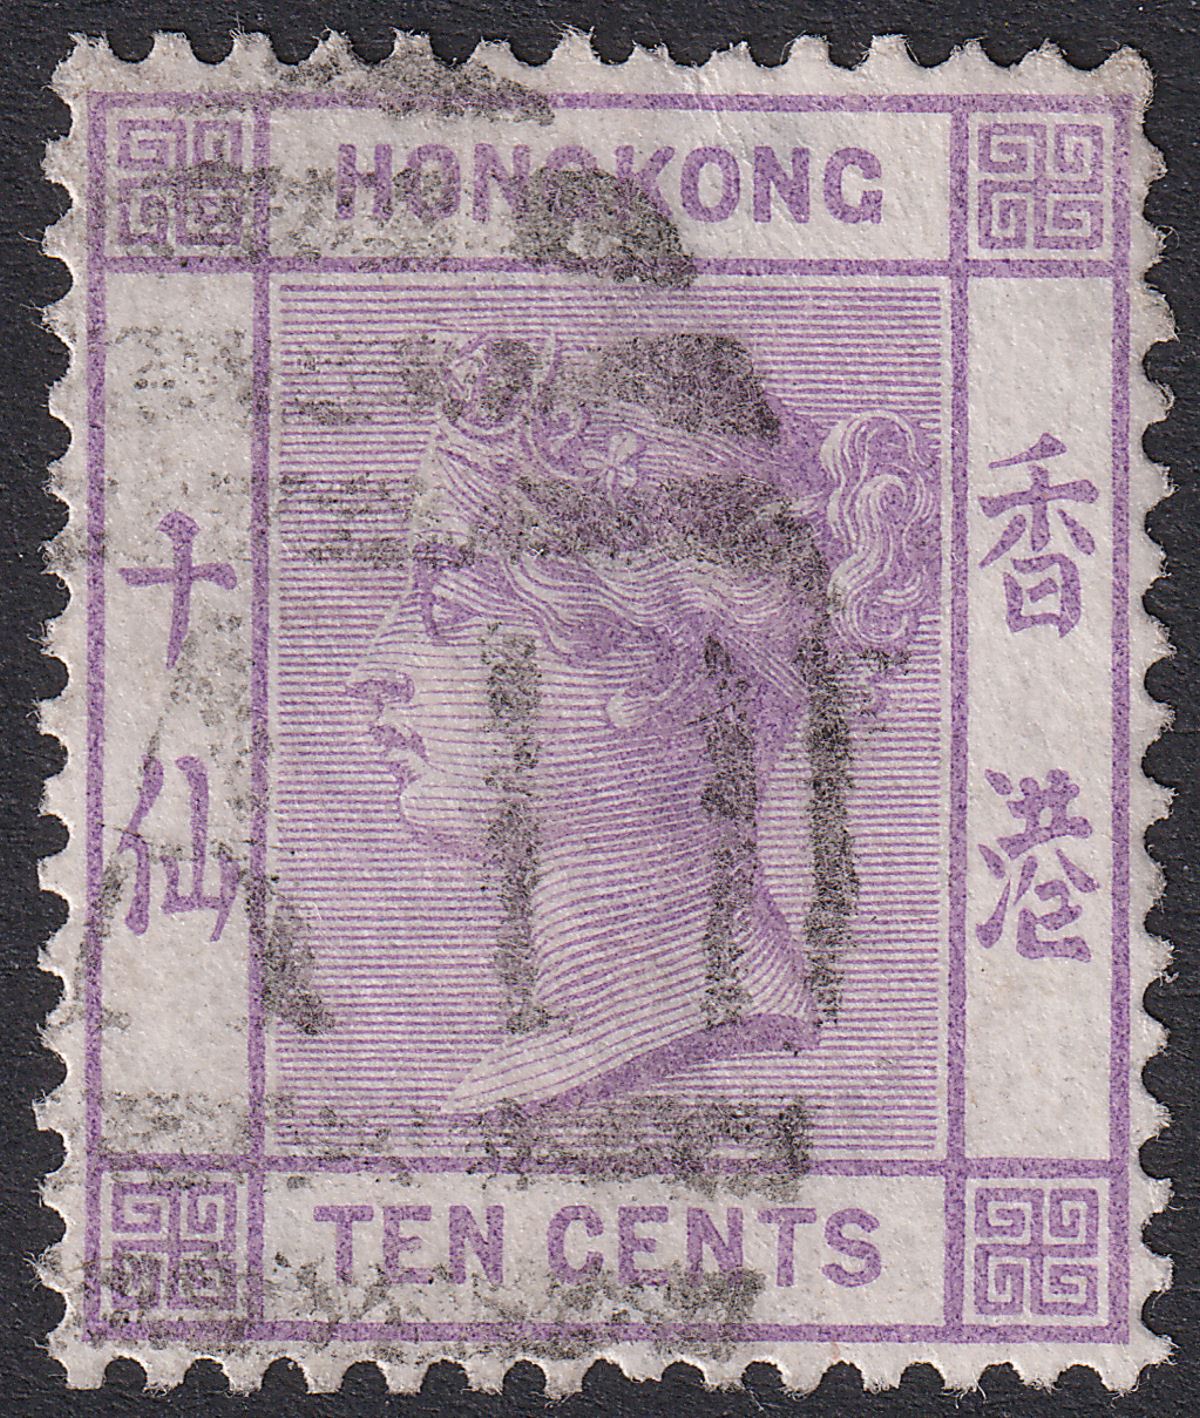 Hong Kong 1880 QV 10c Mauve Used with A1 Postmark Amoy SG Z30 cat £75